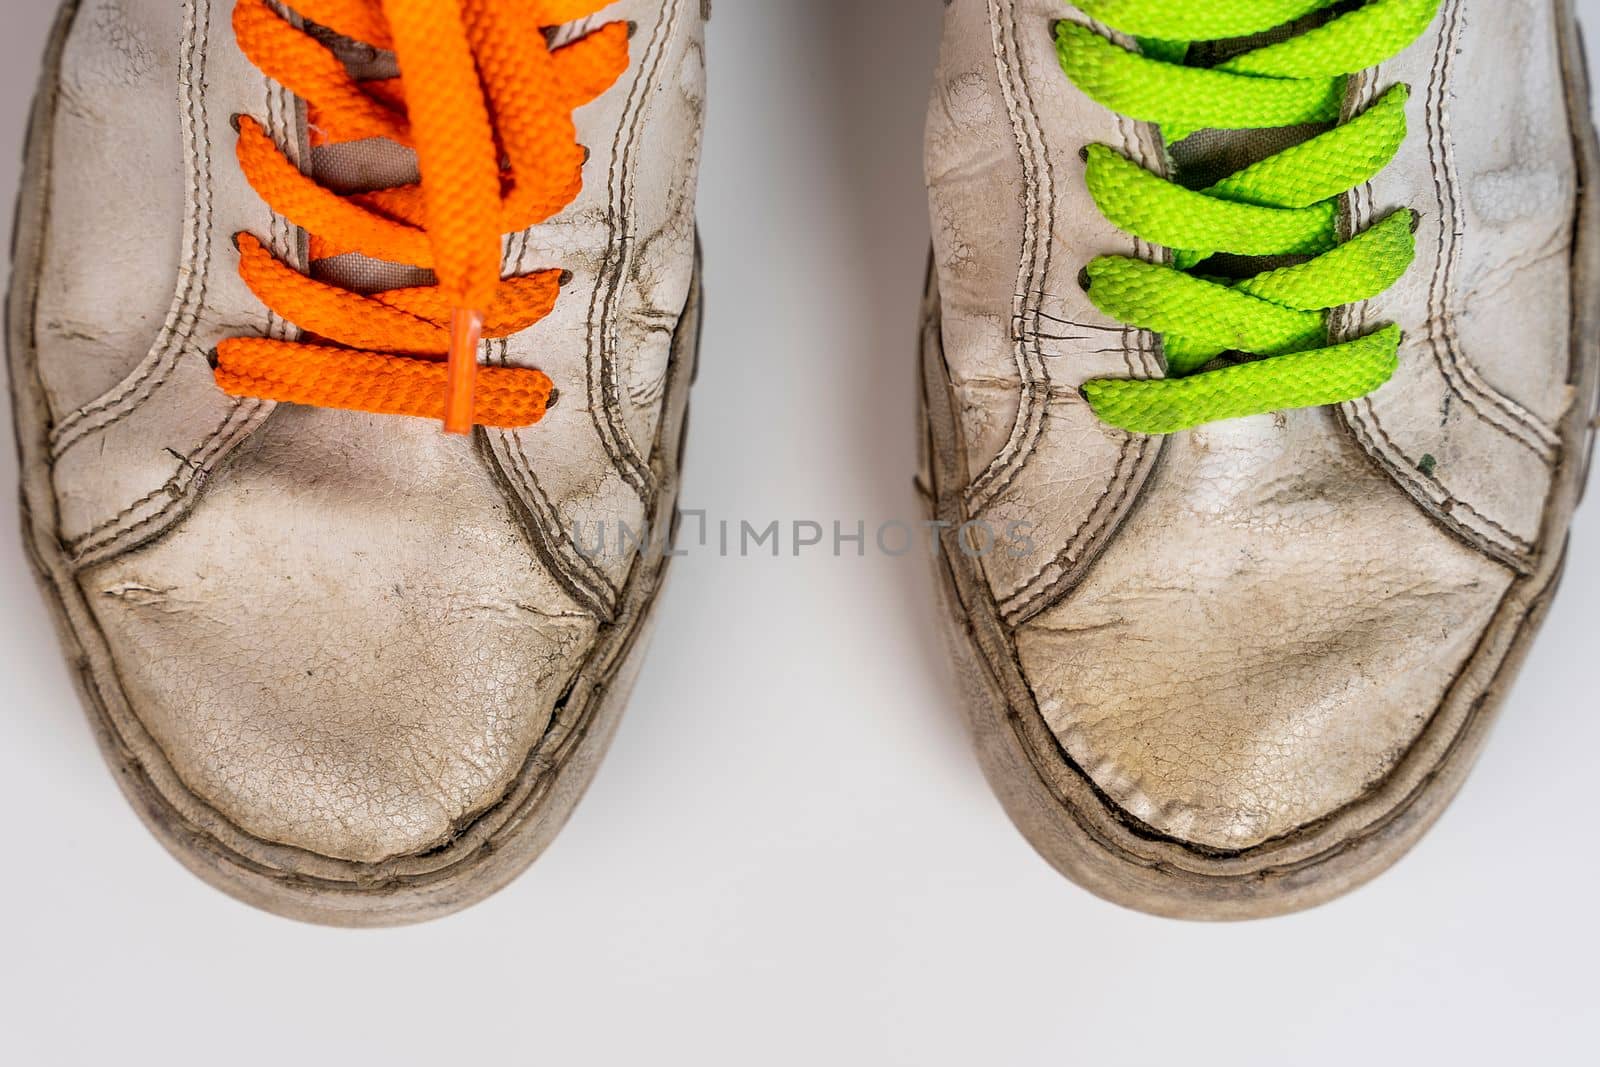 worn old torn white sneakers with colored laces on a white background. Close-up. Fashionable colored acid-colored shoelaces. top view